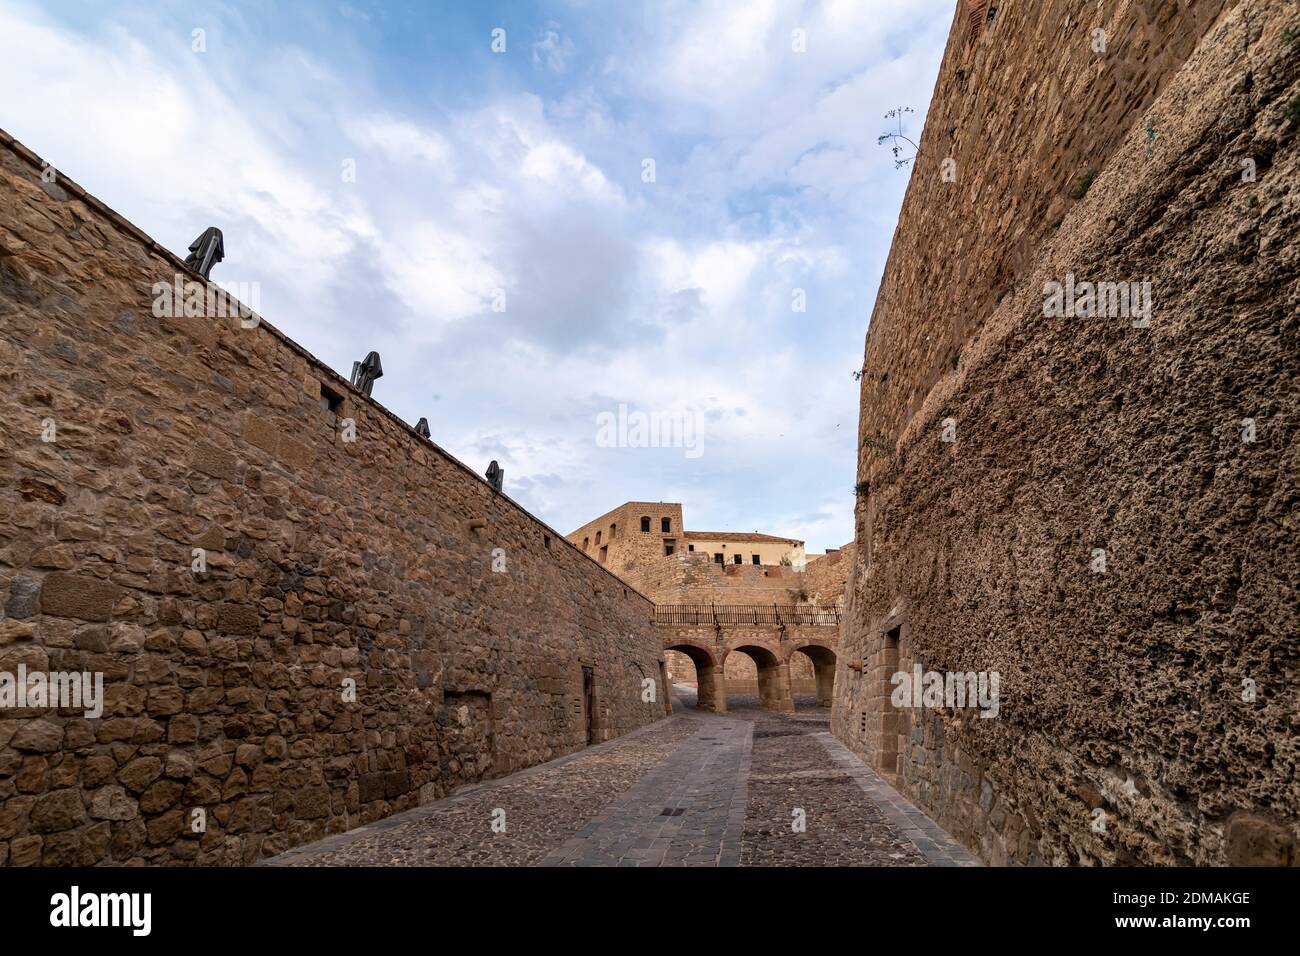 Old Melilla is a walled city, which in past centuries served as a refuge for its inhabitants in territorial disputes. Stock Photo